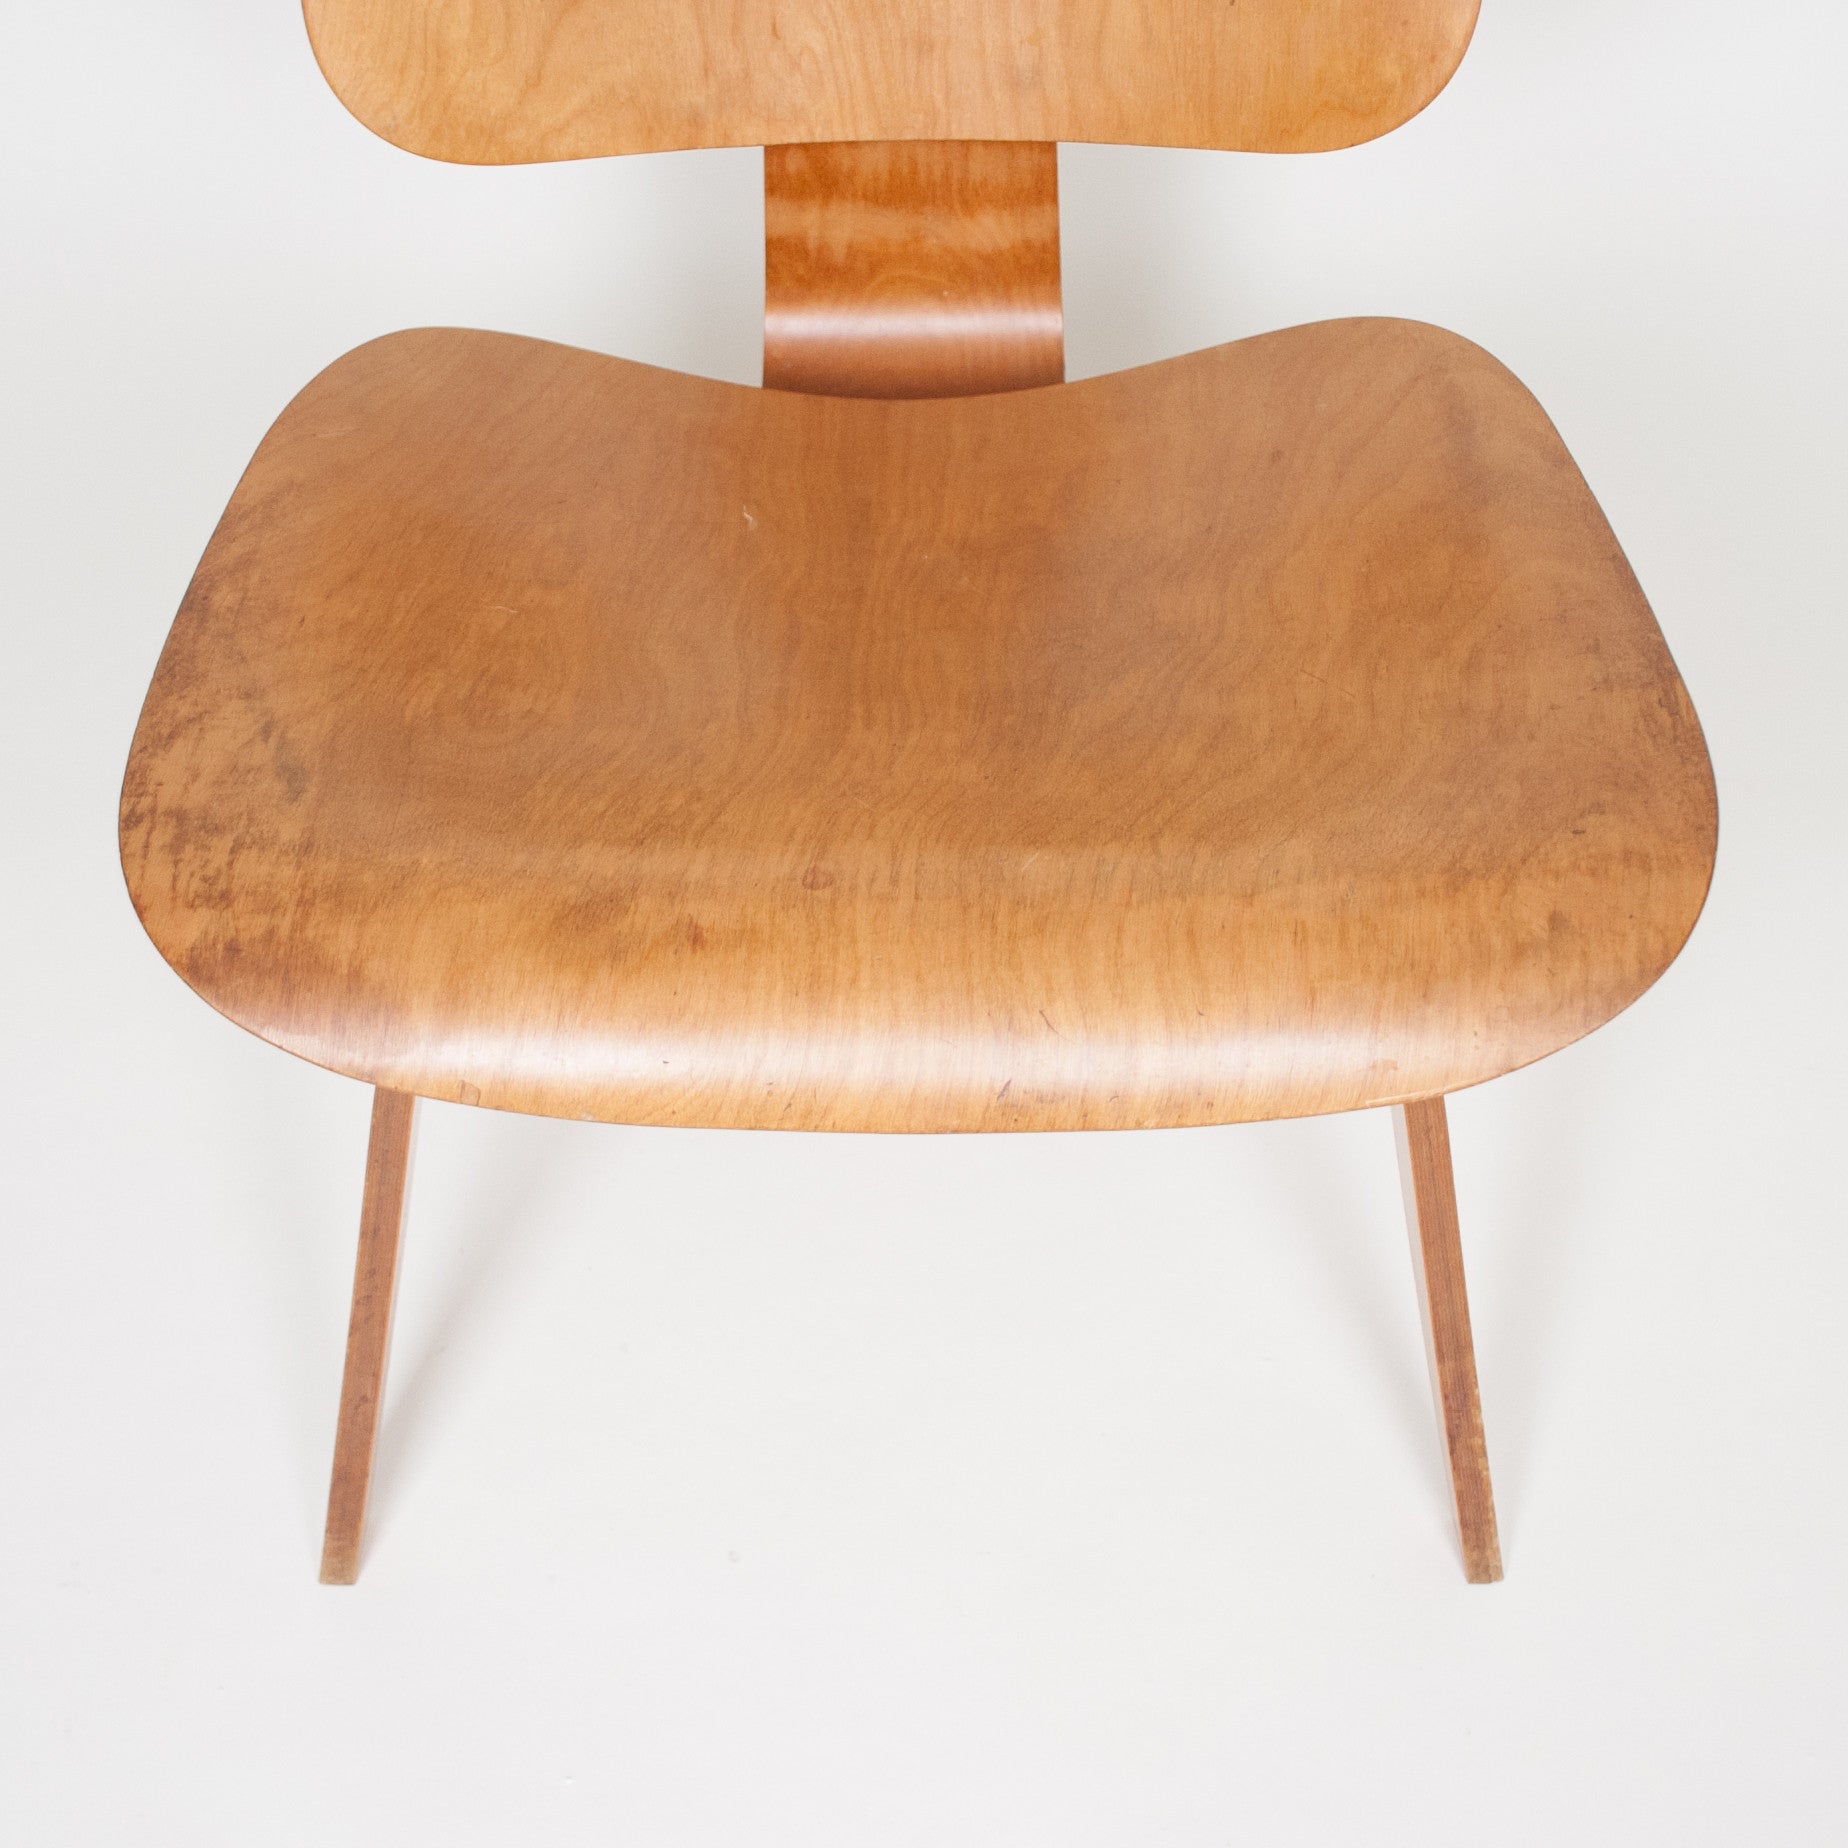 SOLD Eames Evans Herman Miller Early 1947 LCW Plywood Lounge Chair Original Ash 5-2-5